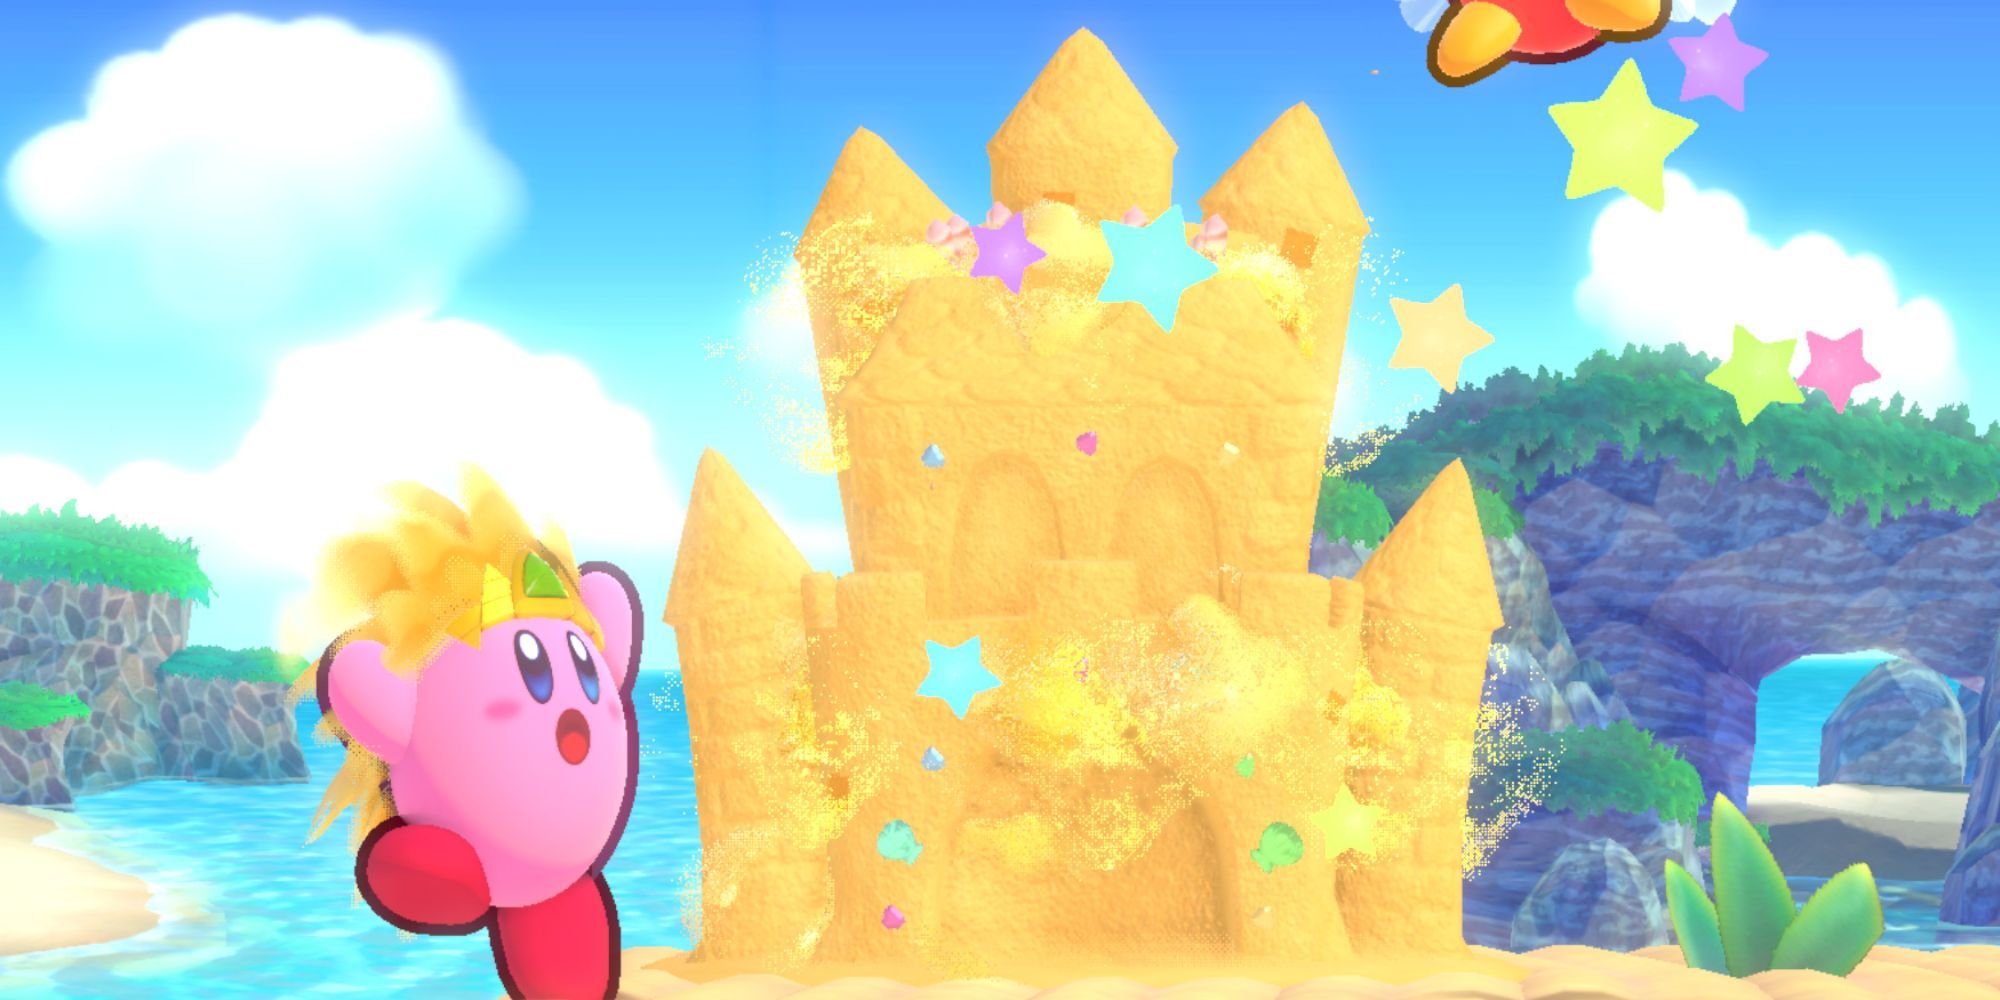 Kirby's new Sand ability from Return to Dream Land Deluxe.